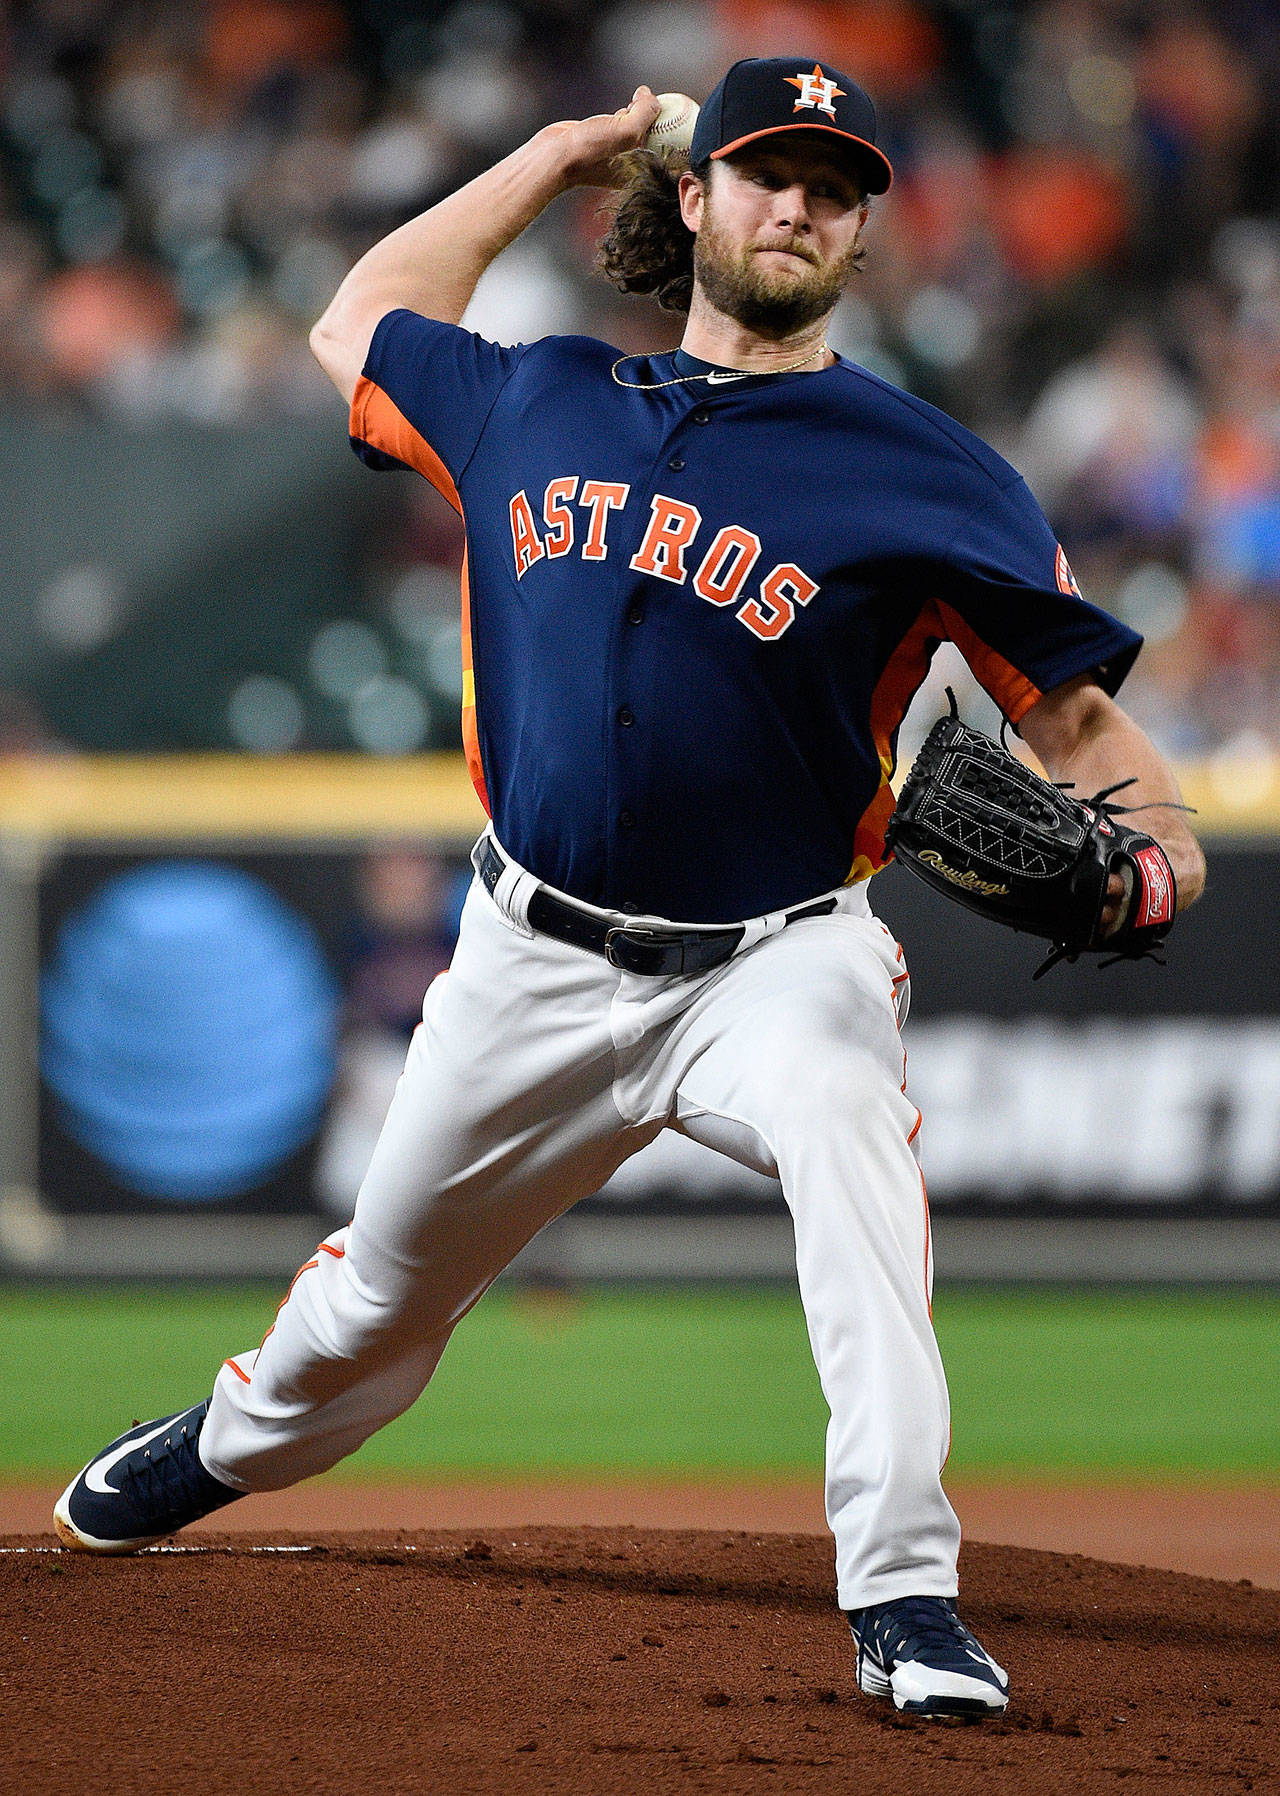 Houston Astros starting pitcher Gerrit Cole allowed just one run and struck out 10 in Sunday’s 6-1 win over the Seattle Mariners. (AP Photo/Eric Christian Smith)